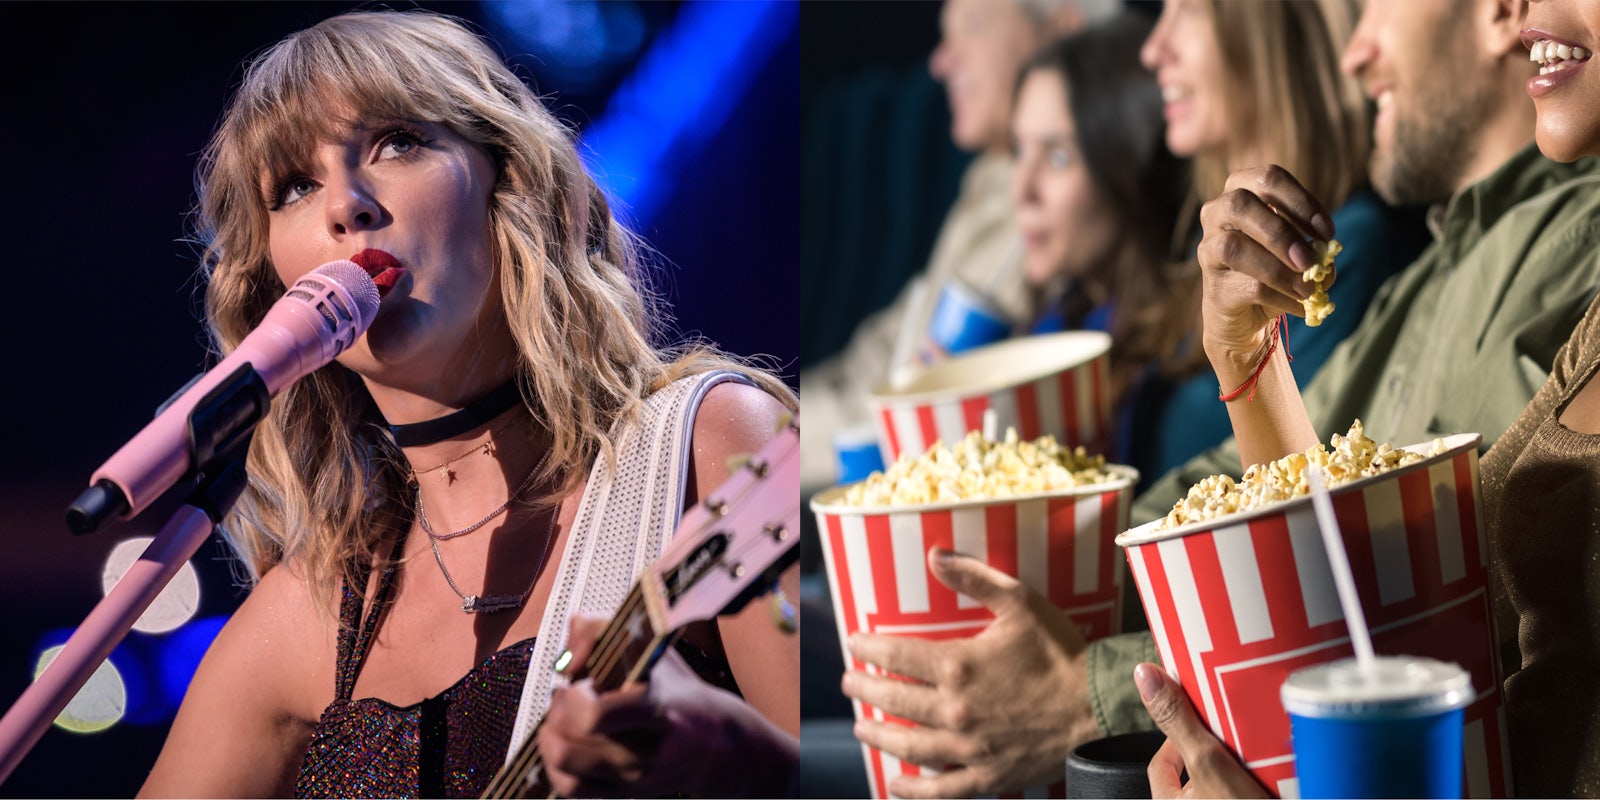 Taylor Swift singing into microphone (l) movie theater audience watching movie eating popcorn (r)